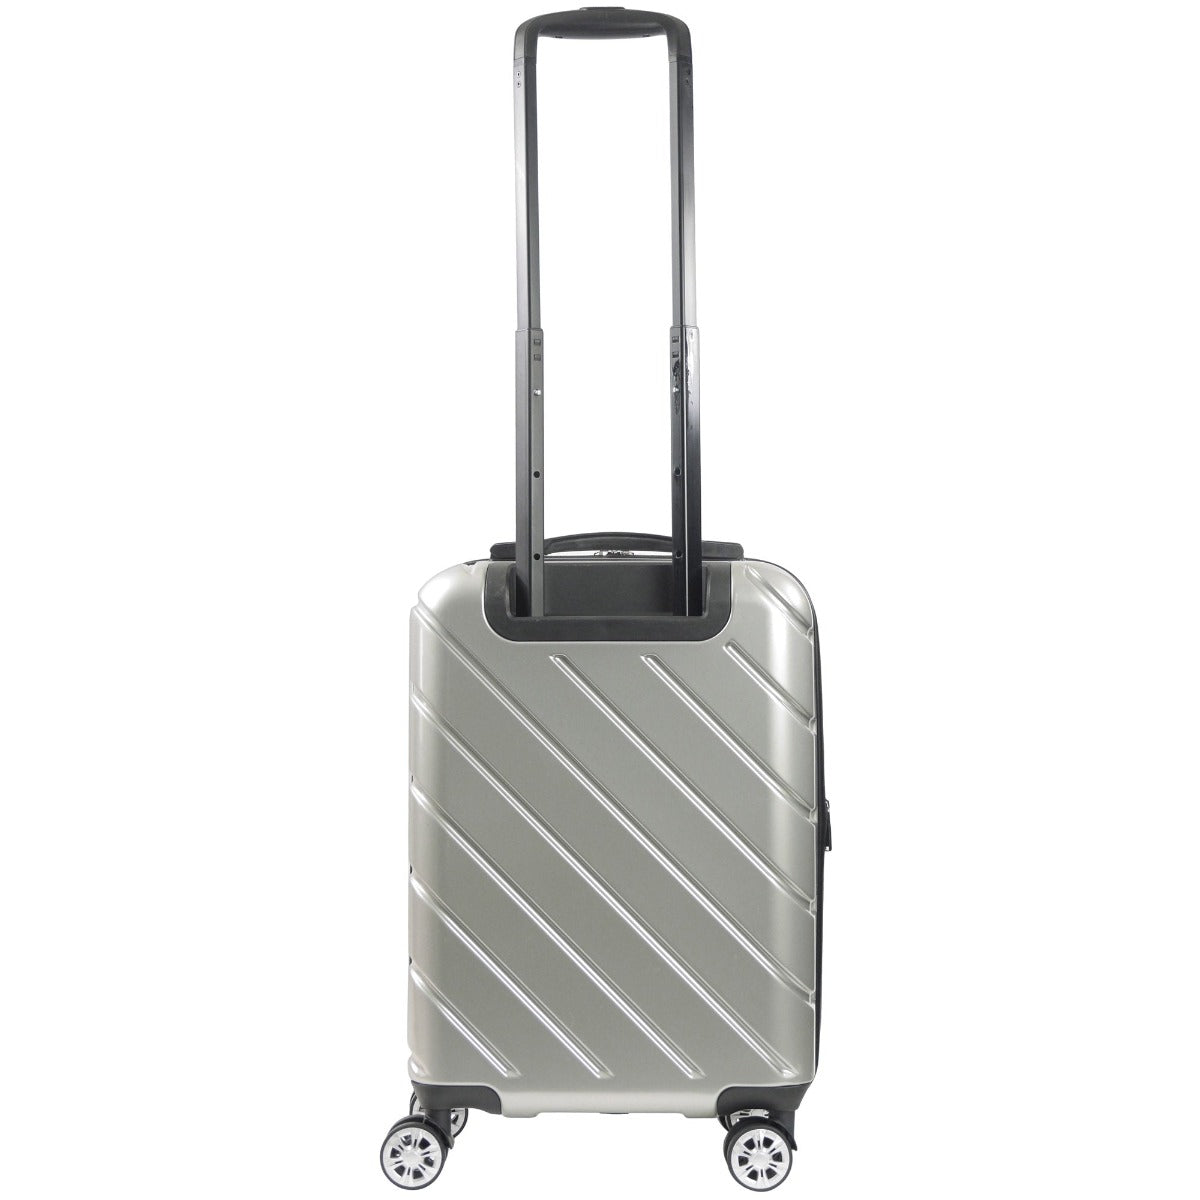 Ful Velocity 22 inch carry-on hard-sided spinner suitcase silver luggage